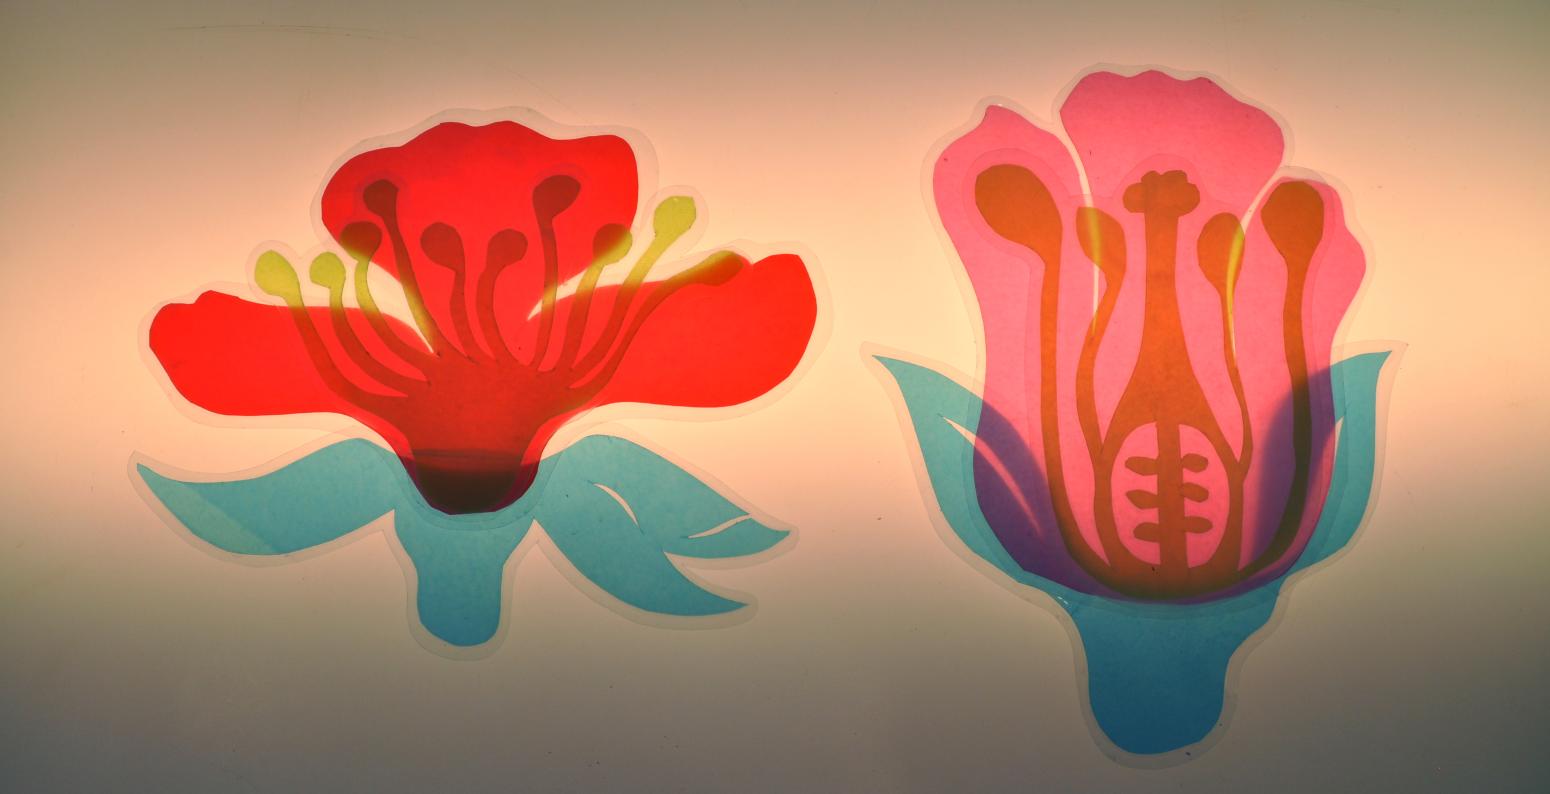 Laminated paper shapes sitting on a light table and stacked to create two separate flower arrangements.